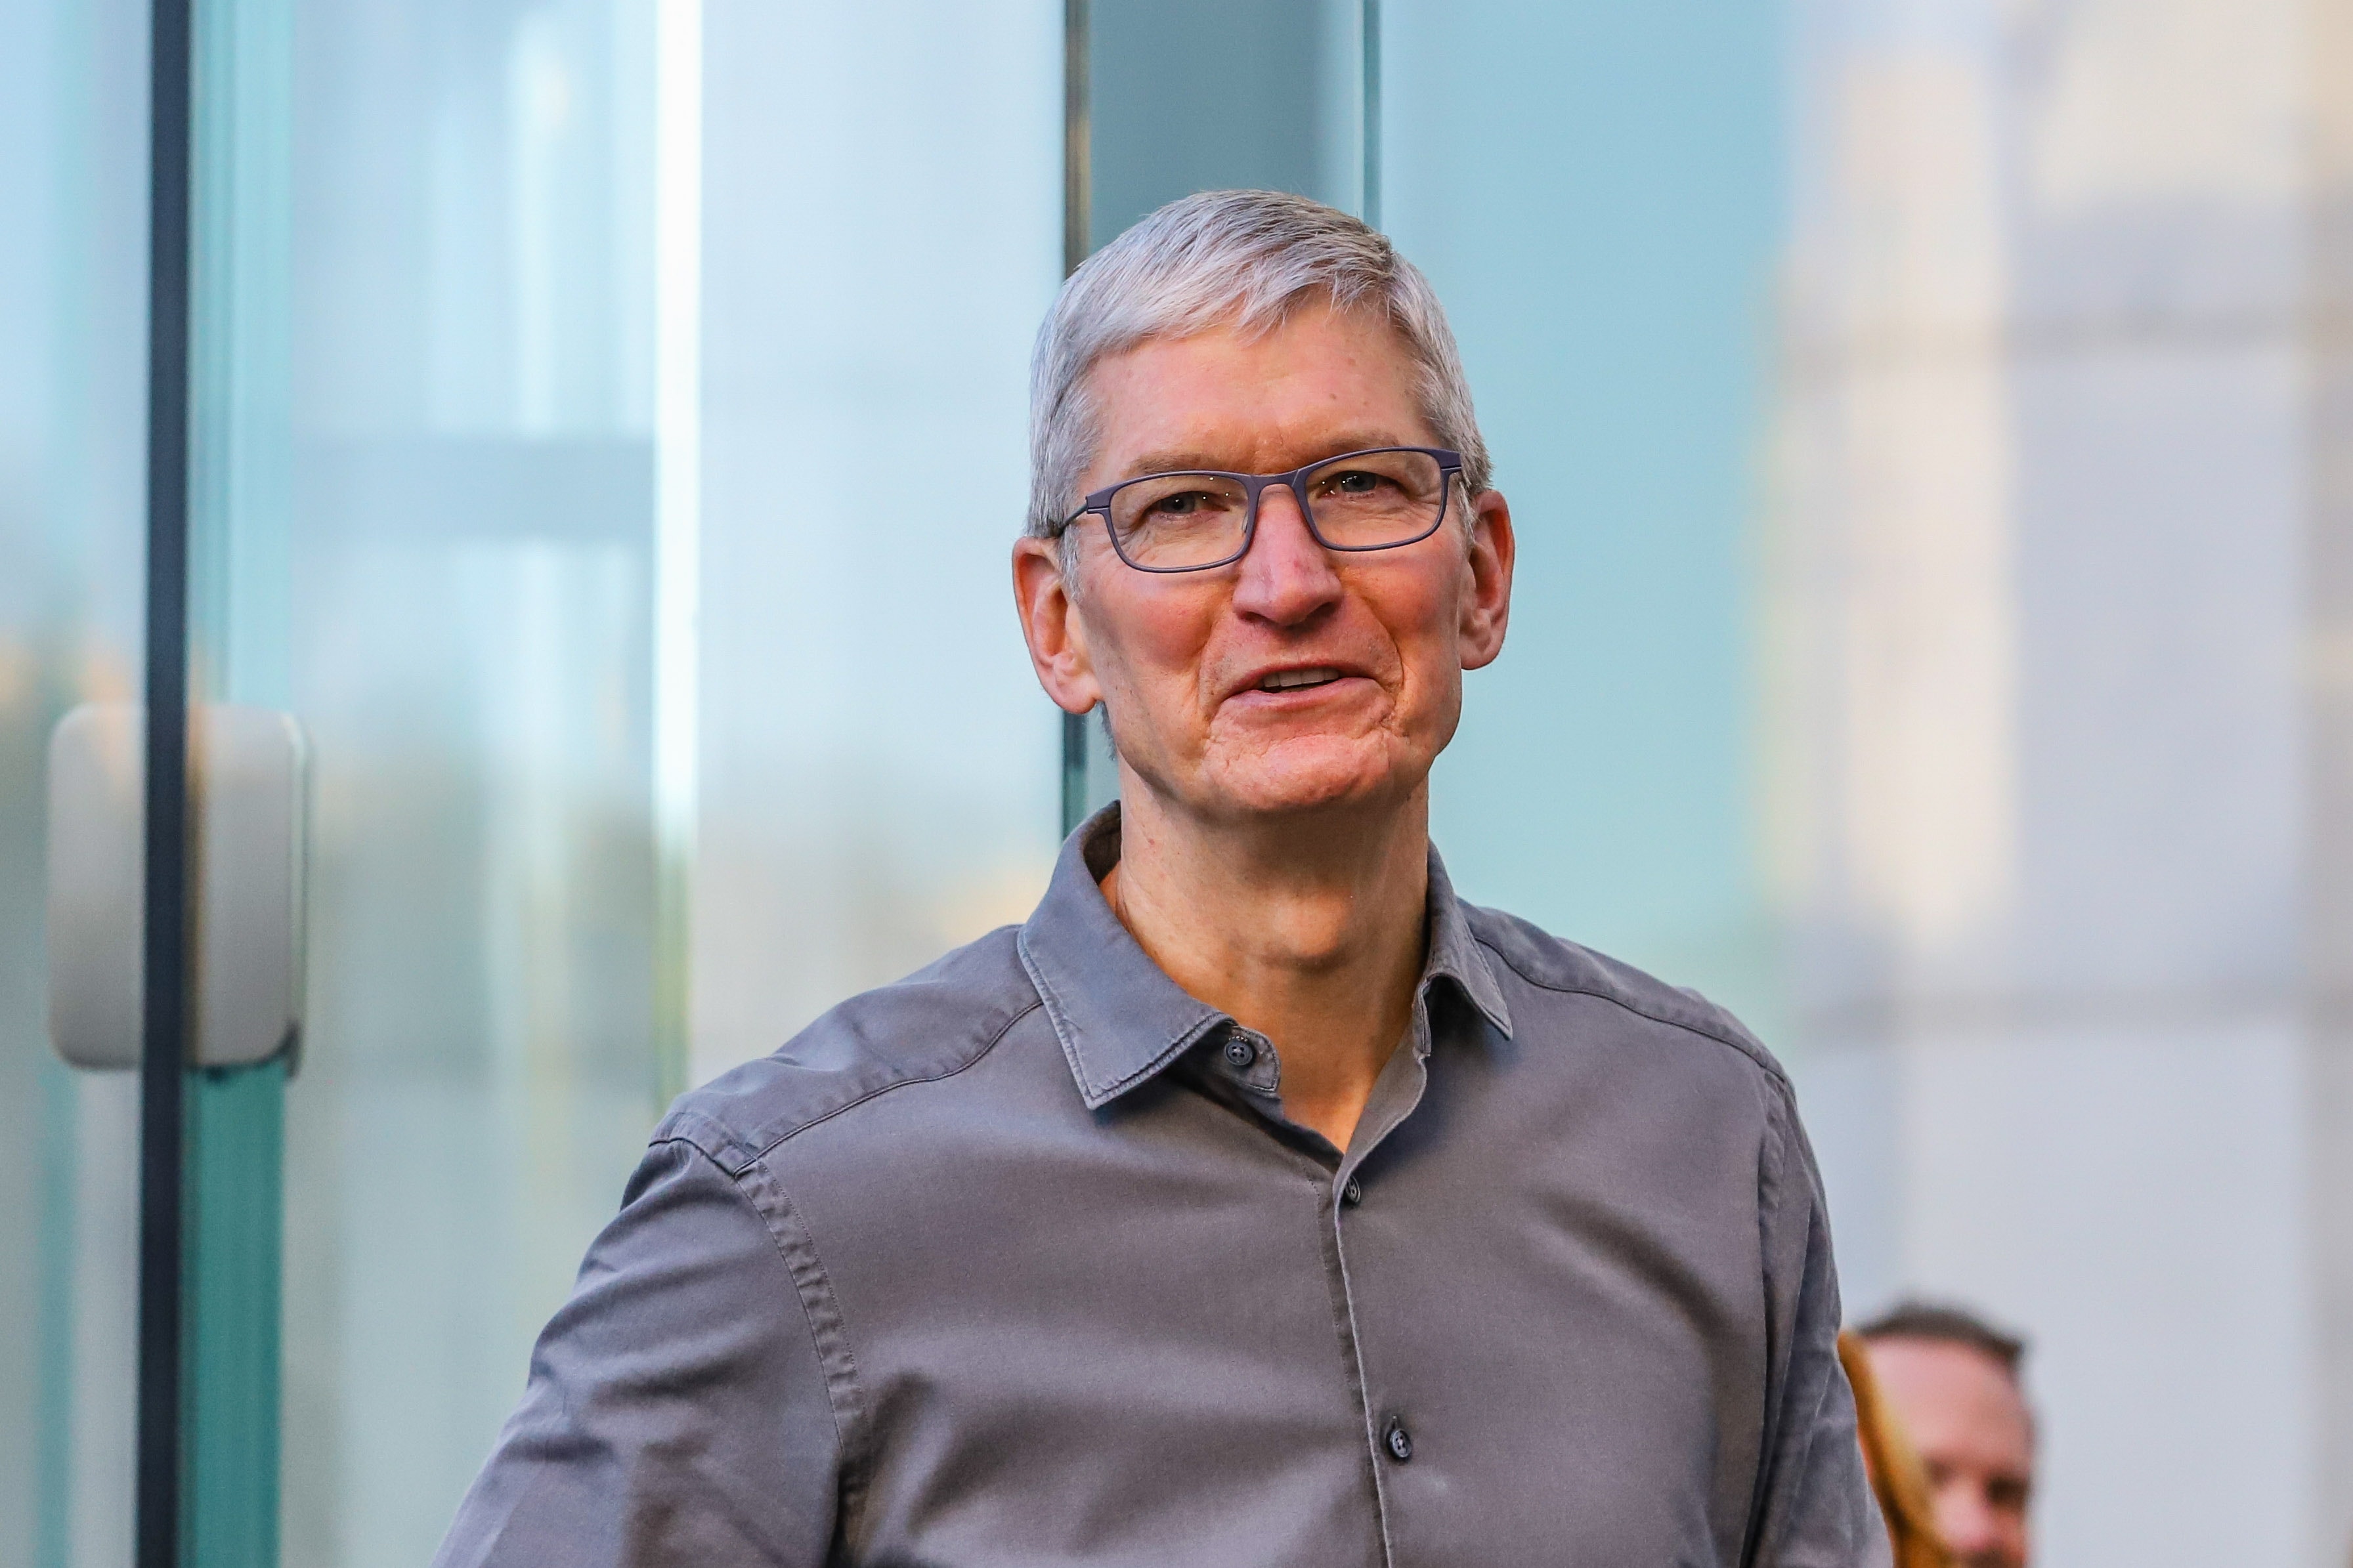 Tim Cook Pulled Off A 'Top Gun Maverick' With Strong Apple China Revenue: Analyst Reacts